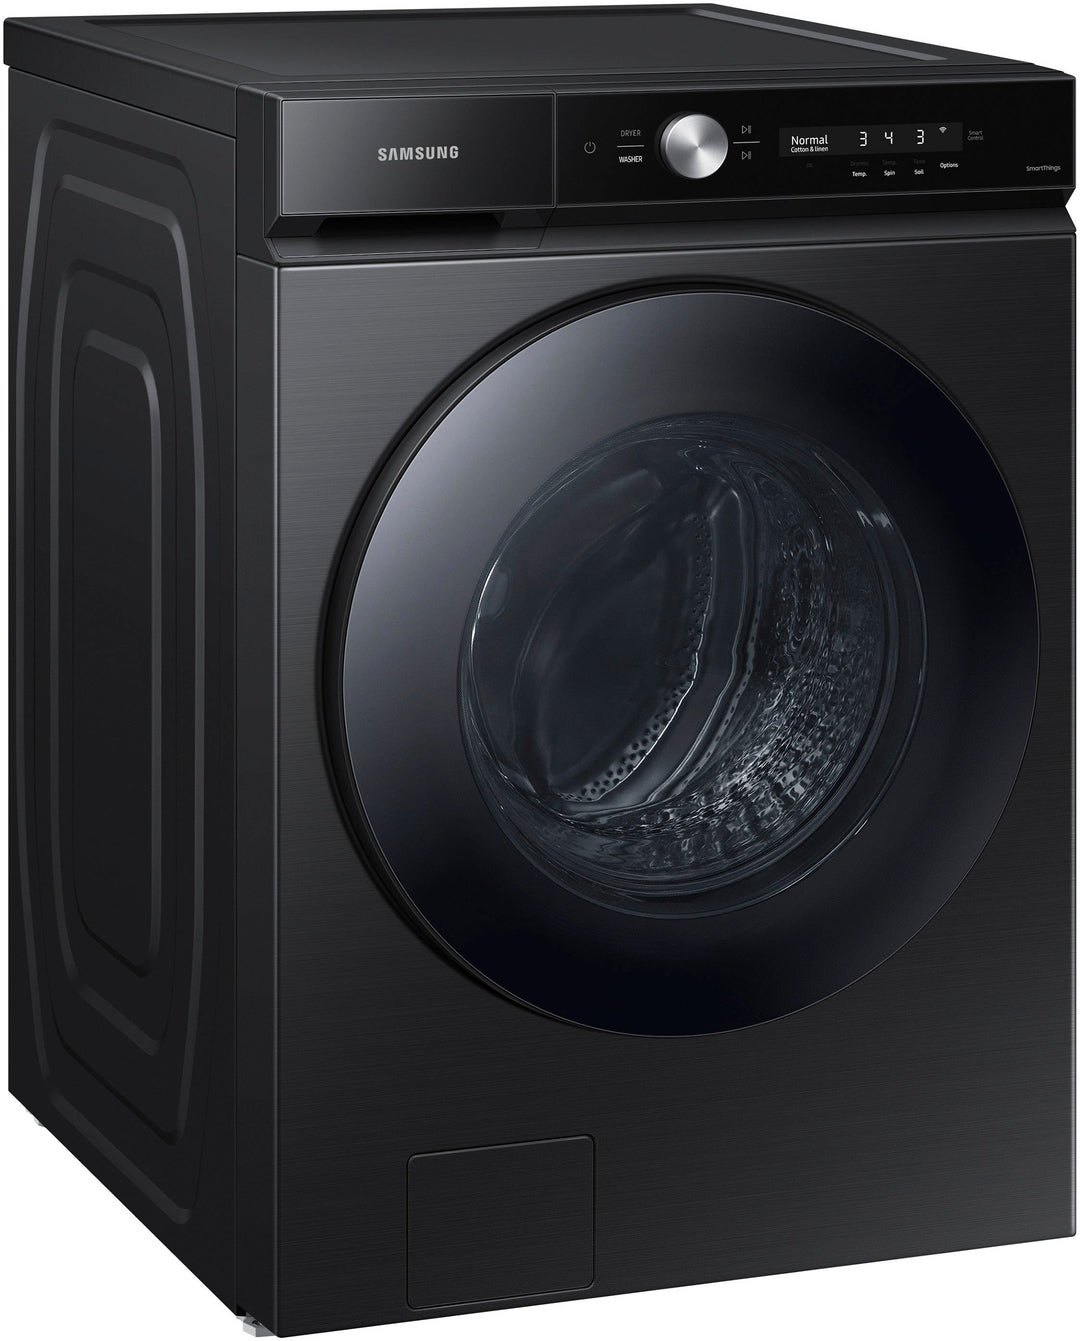 Samsung - Bespoke 5.3 cu. ft. Ultra Capacity Front Load Washer with Super Speed Wash and AI Smart Dial - Brushed black_4